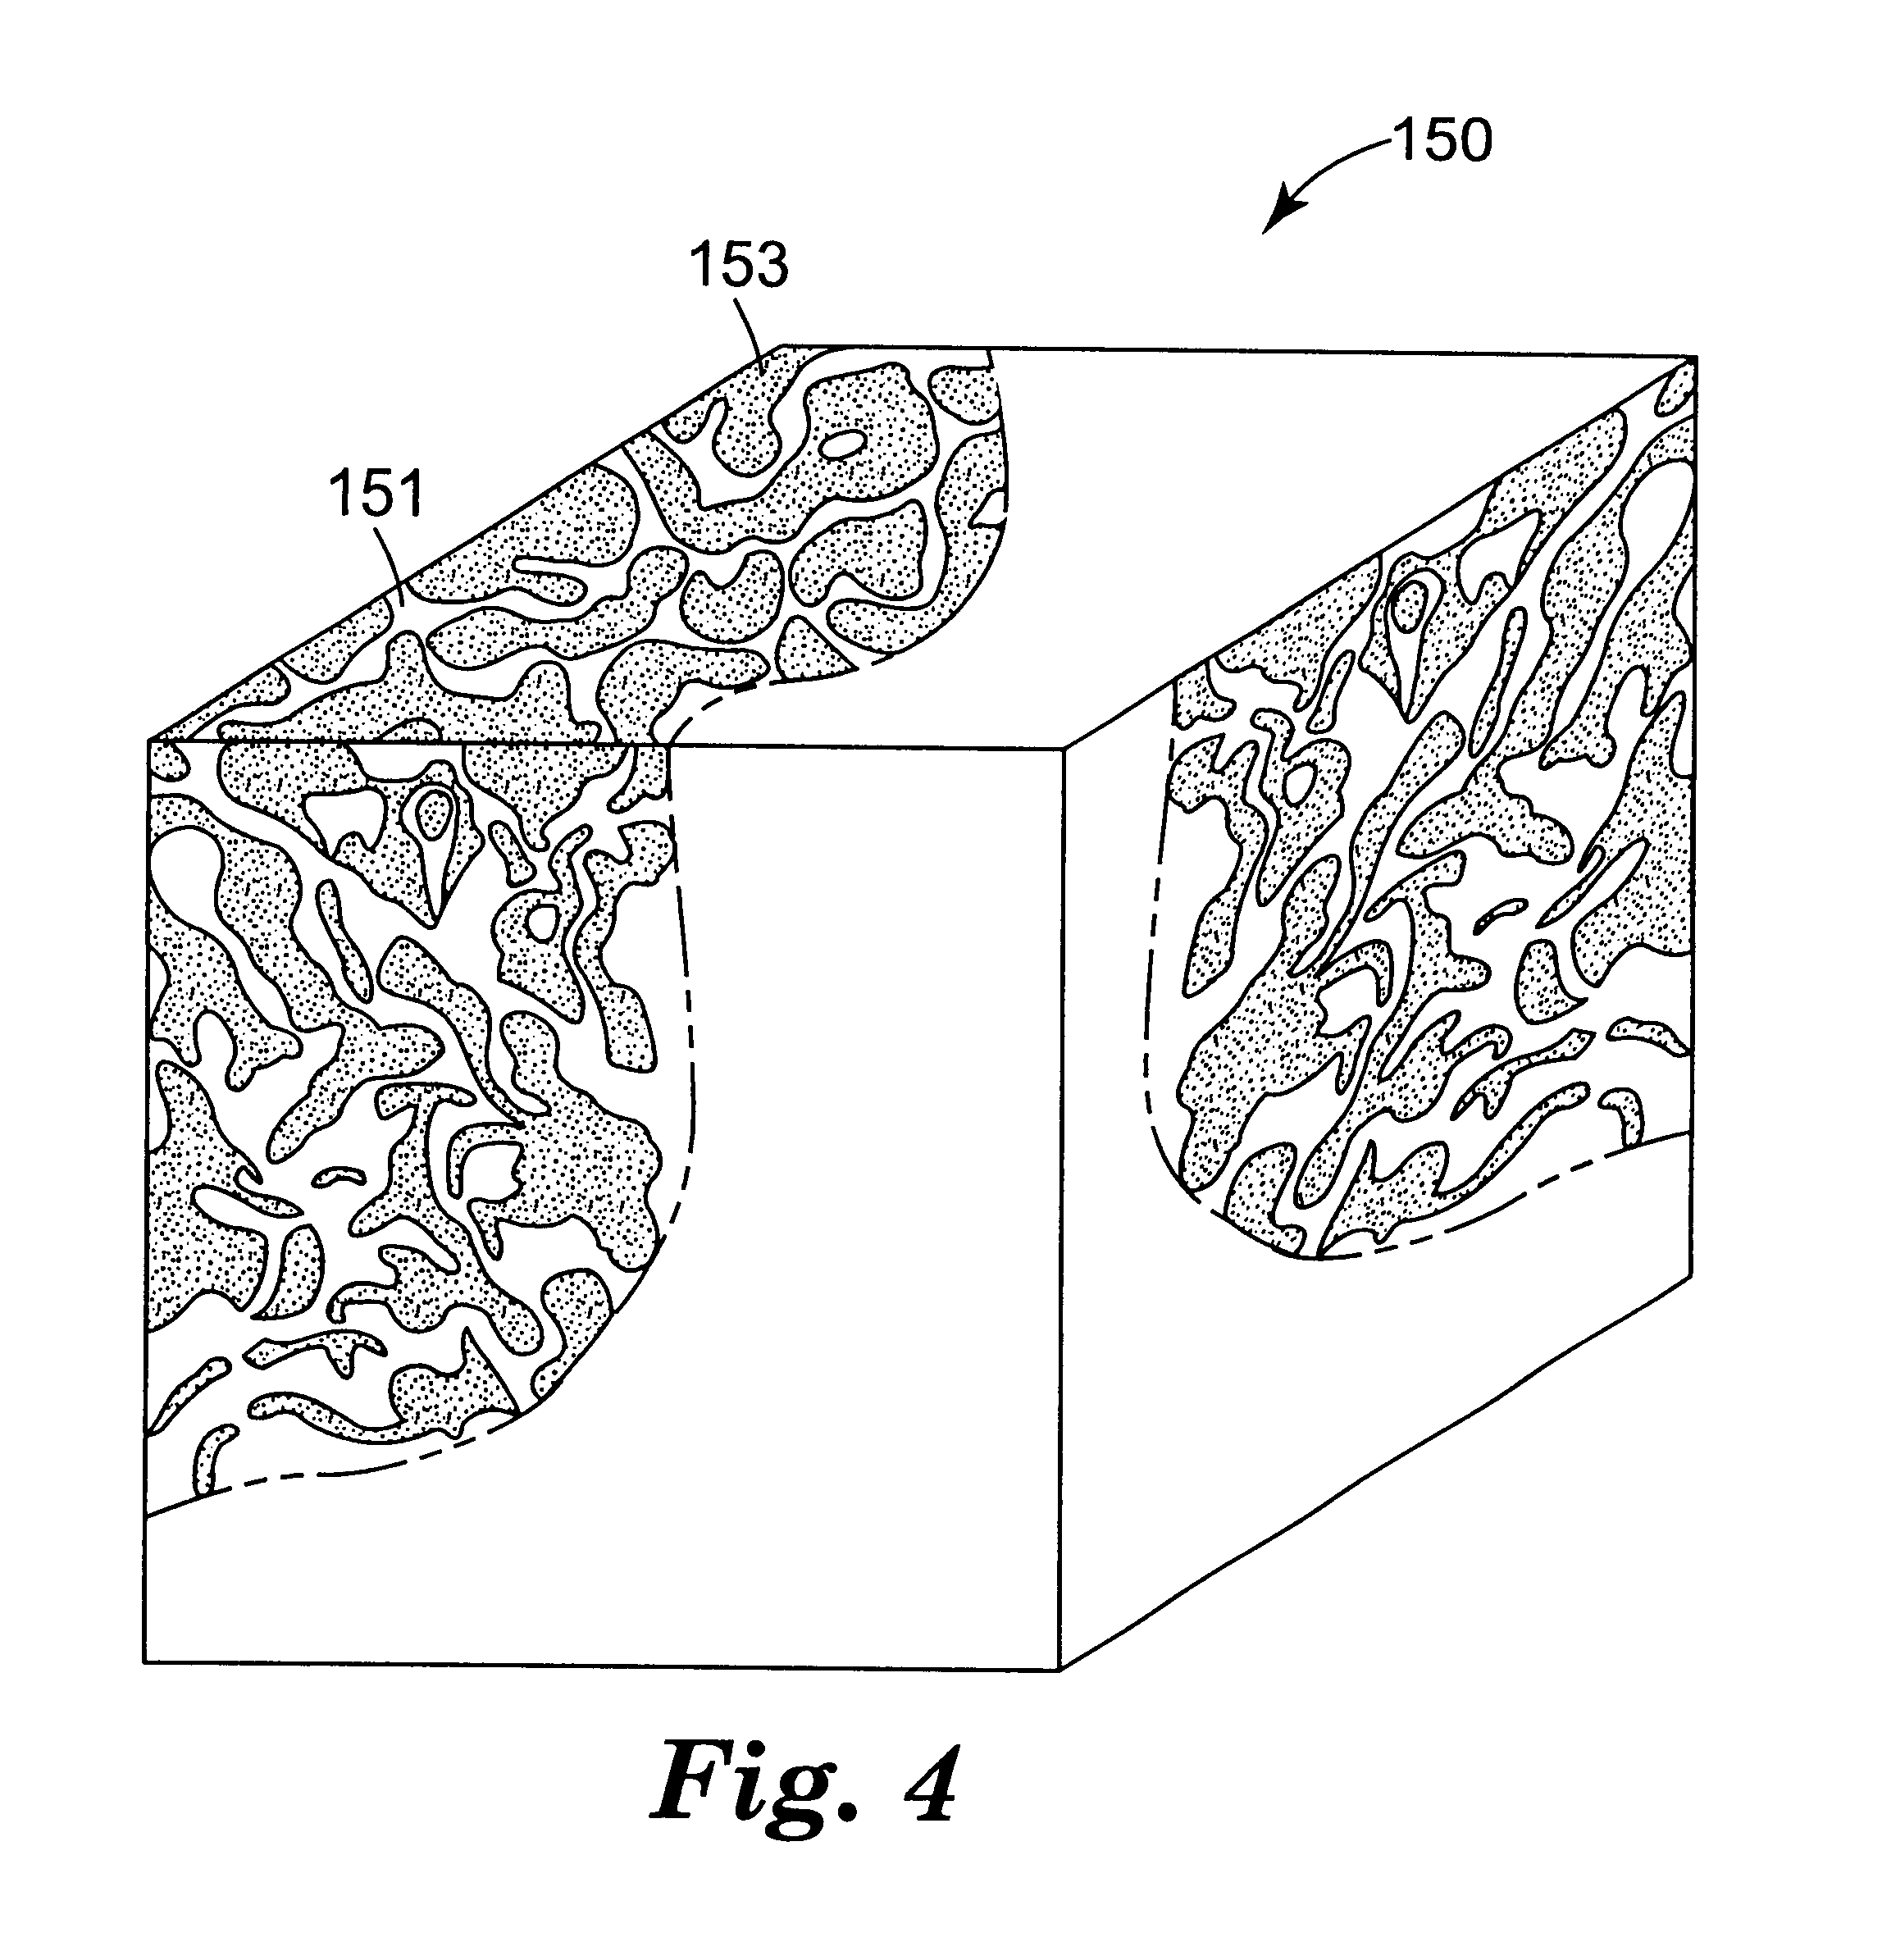 Fused Al2O3-rare earth oxide eutectic abrasive particles, abrasive articles, and methods of making and using the same